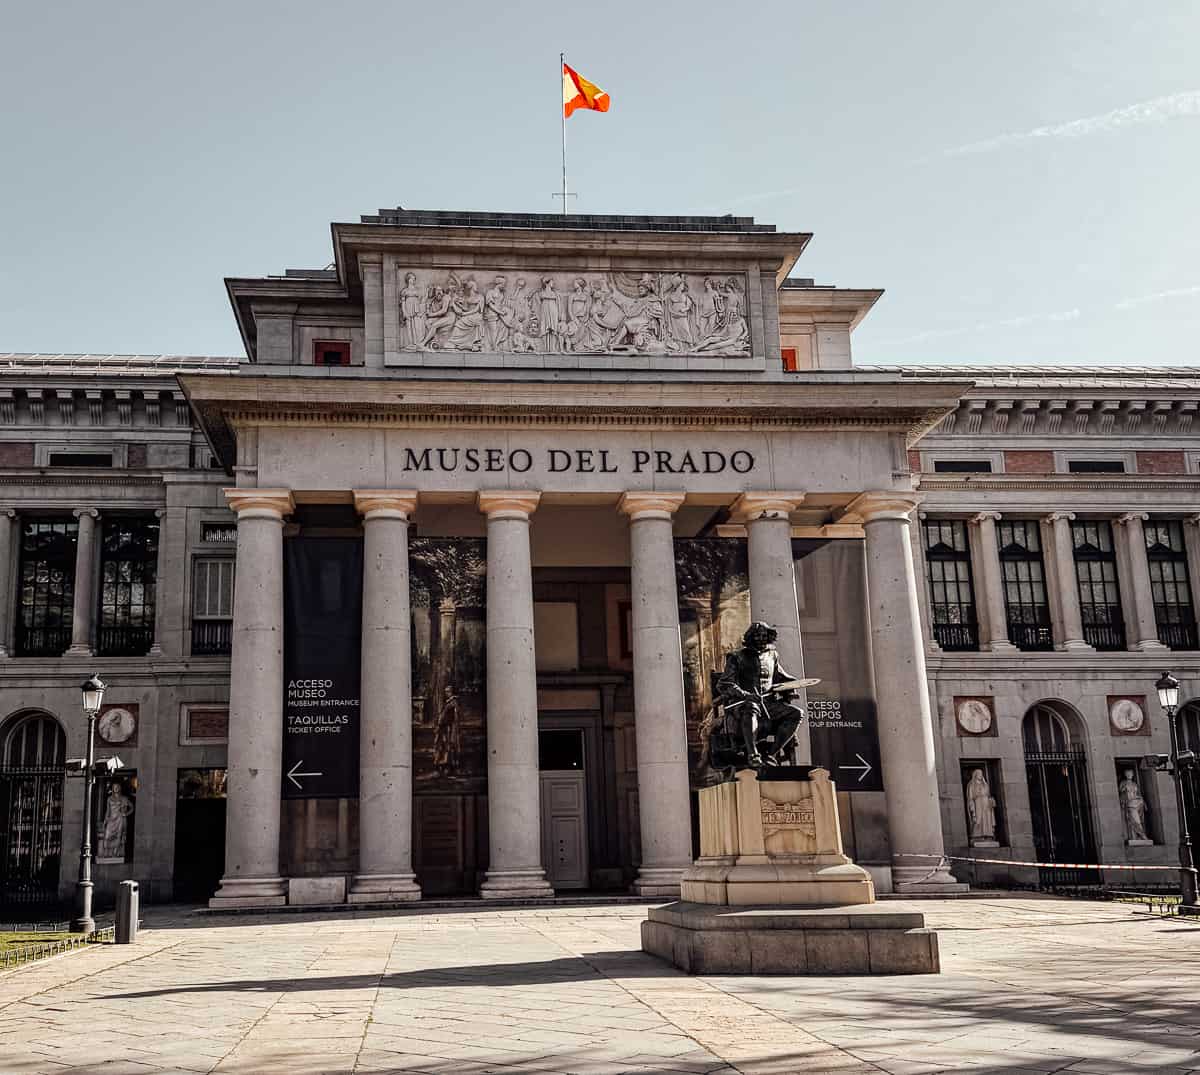 The neoclassical facade of the Museo del Prado in Madrid, with its towering columns and the Spanish flag waving above, representing one of the most significant cultural landmarks in Spain.